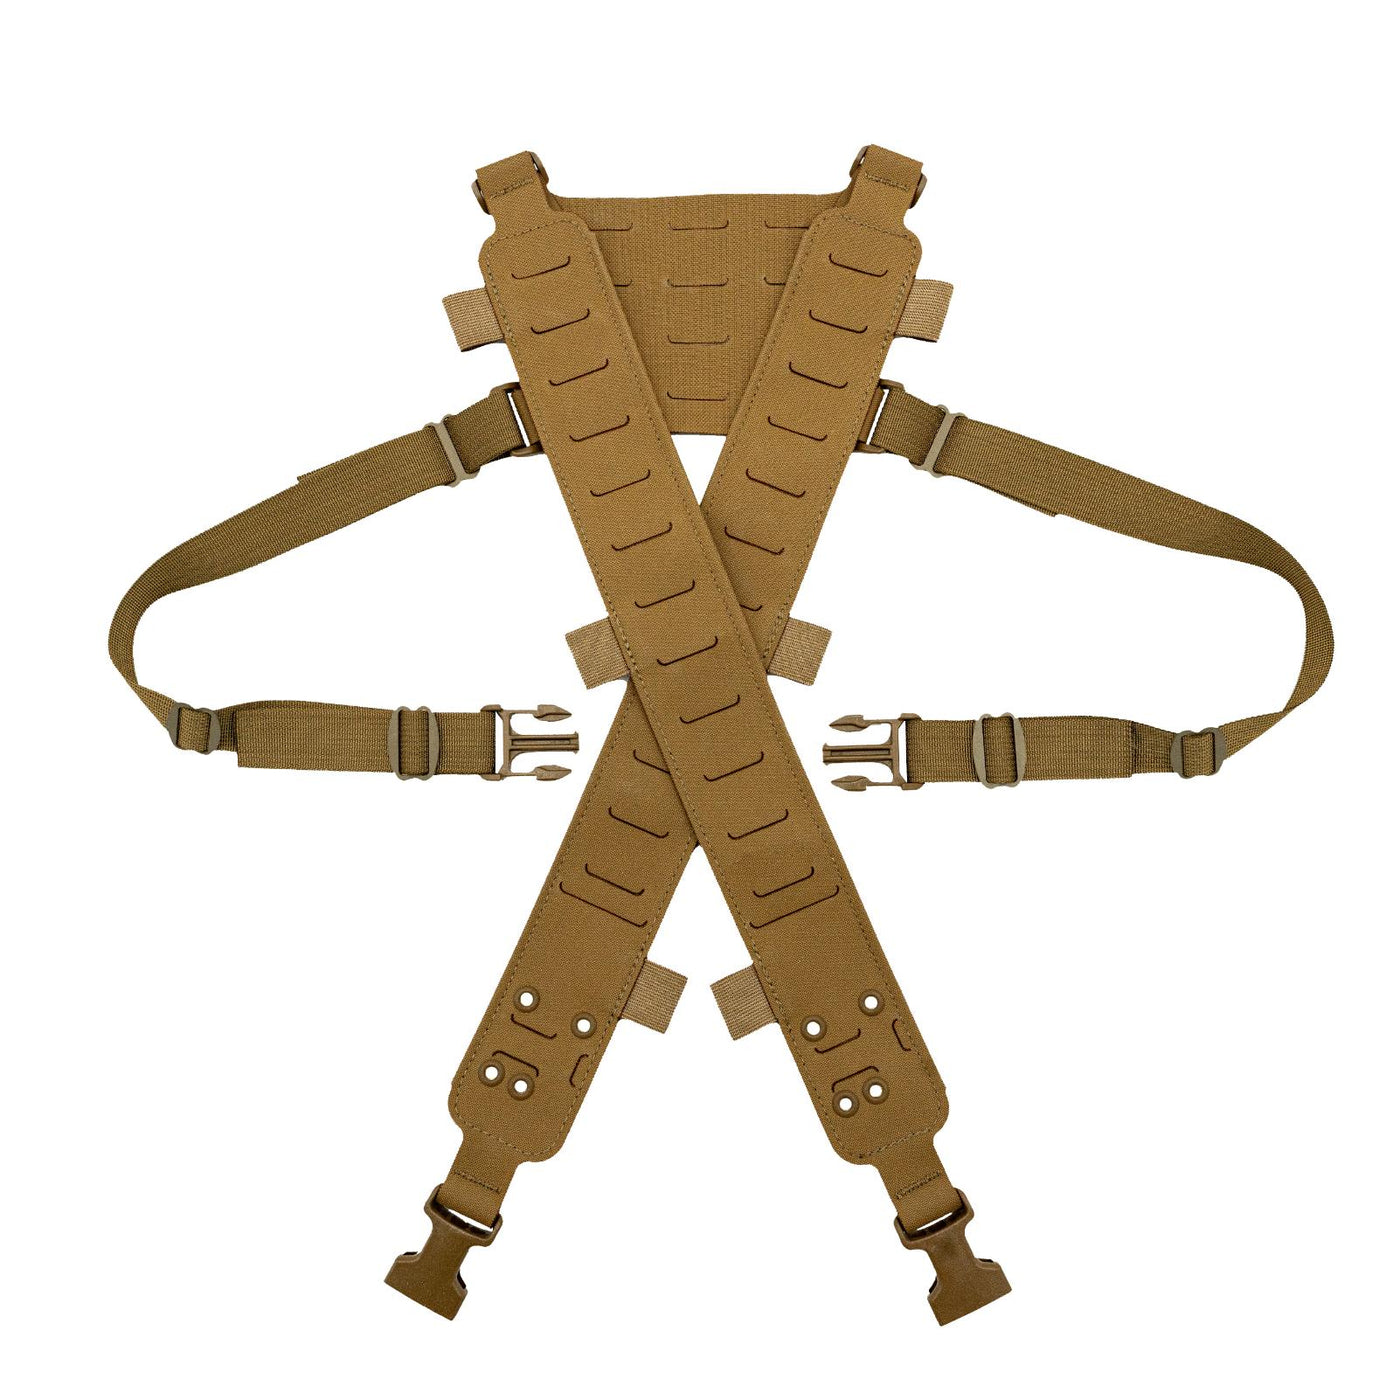 Partisan Shoulder Strap and Harness